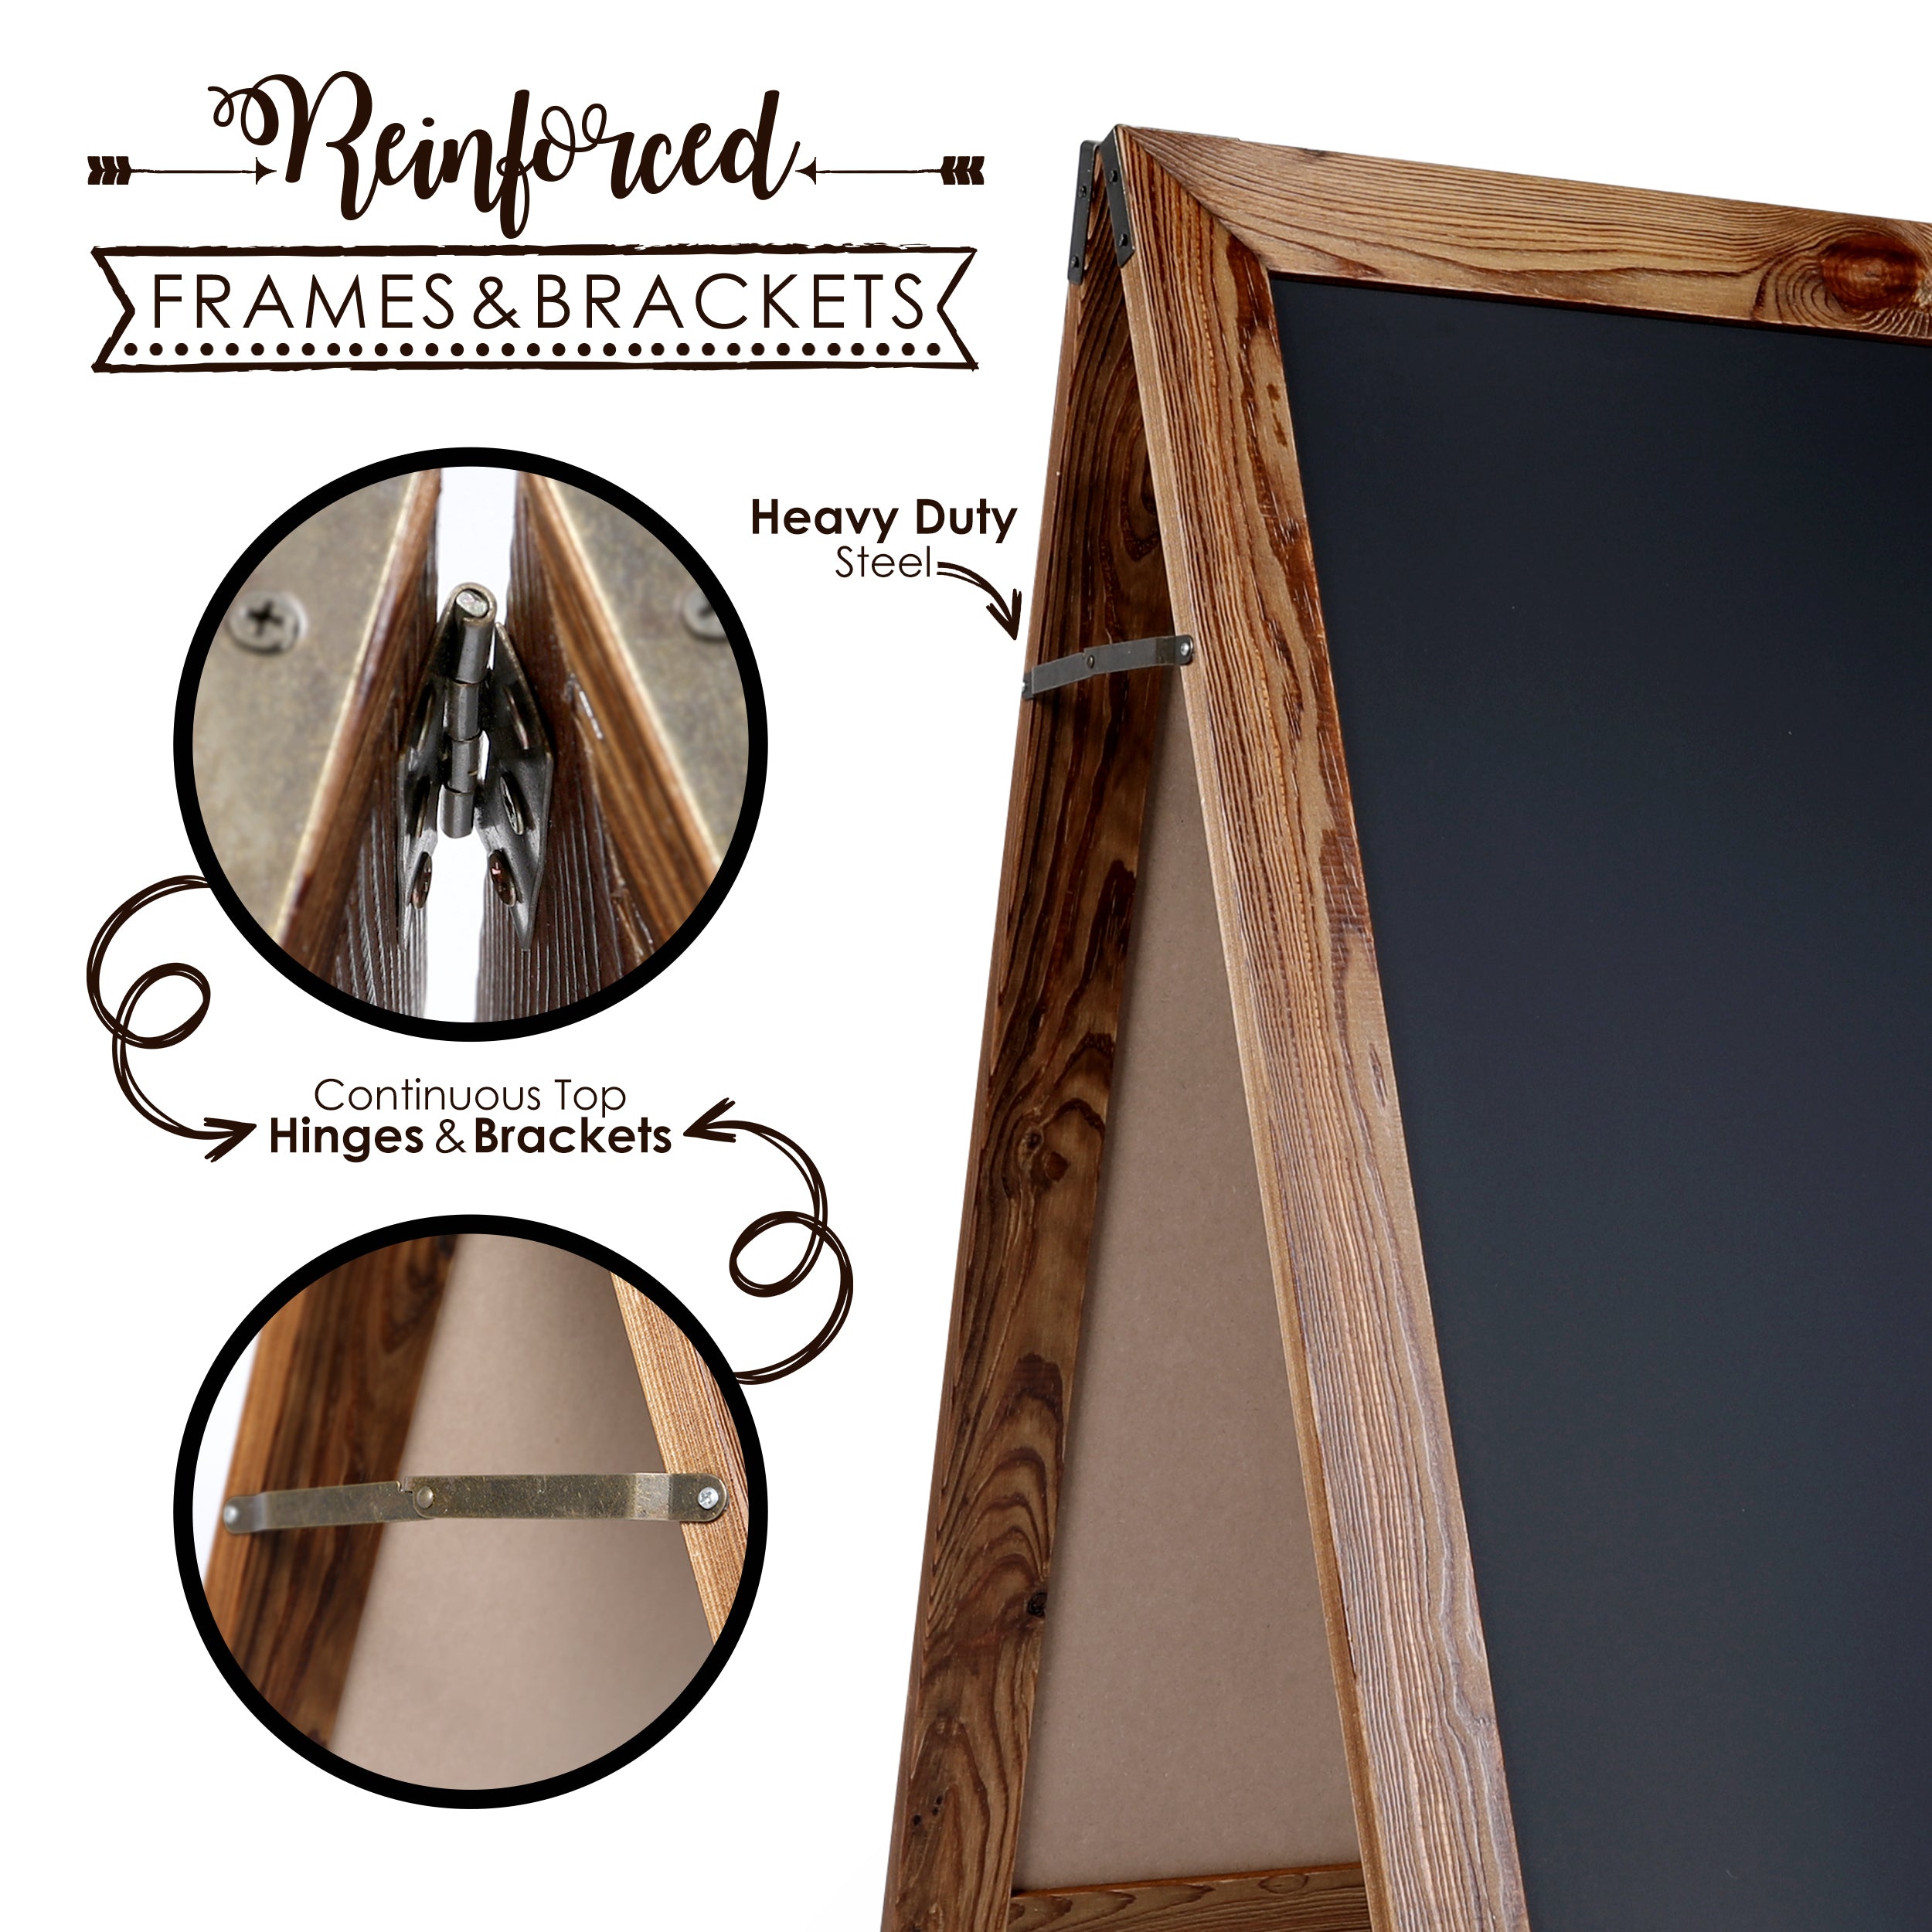 wood framed double sided rotating chalk board — ARCHITECTURAL ANTIQUES